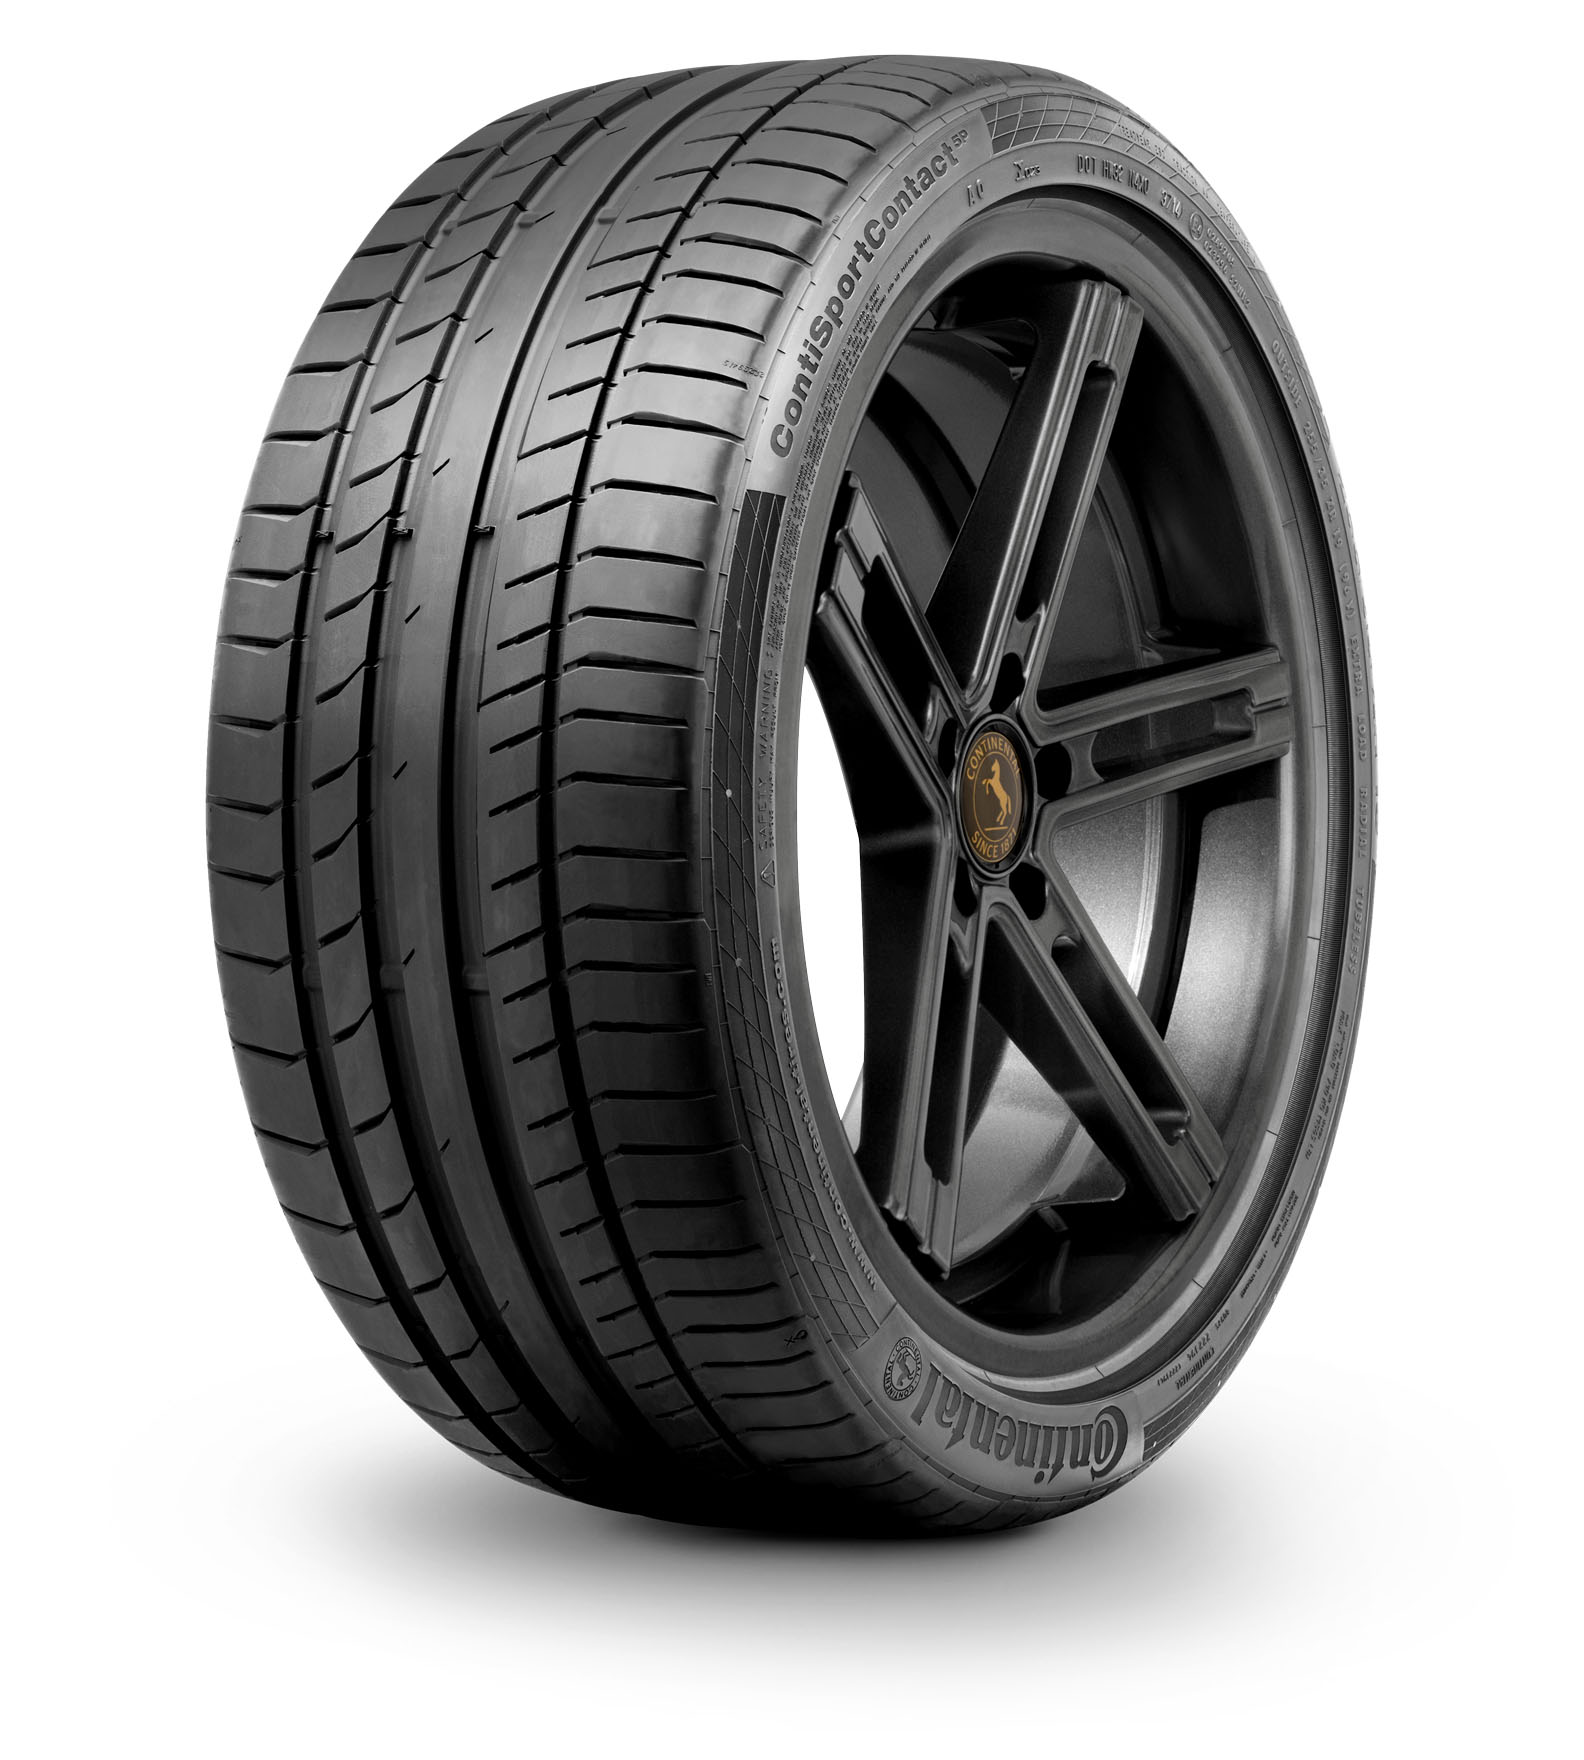 Continental 245/35R21 96W ContiSportContact™ 5 P XL DOT19